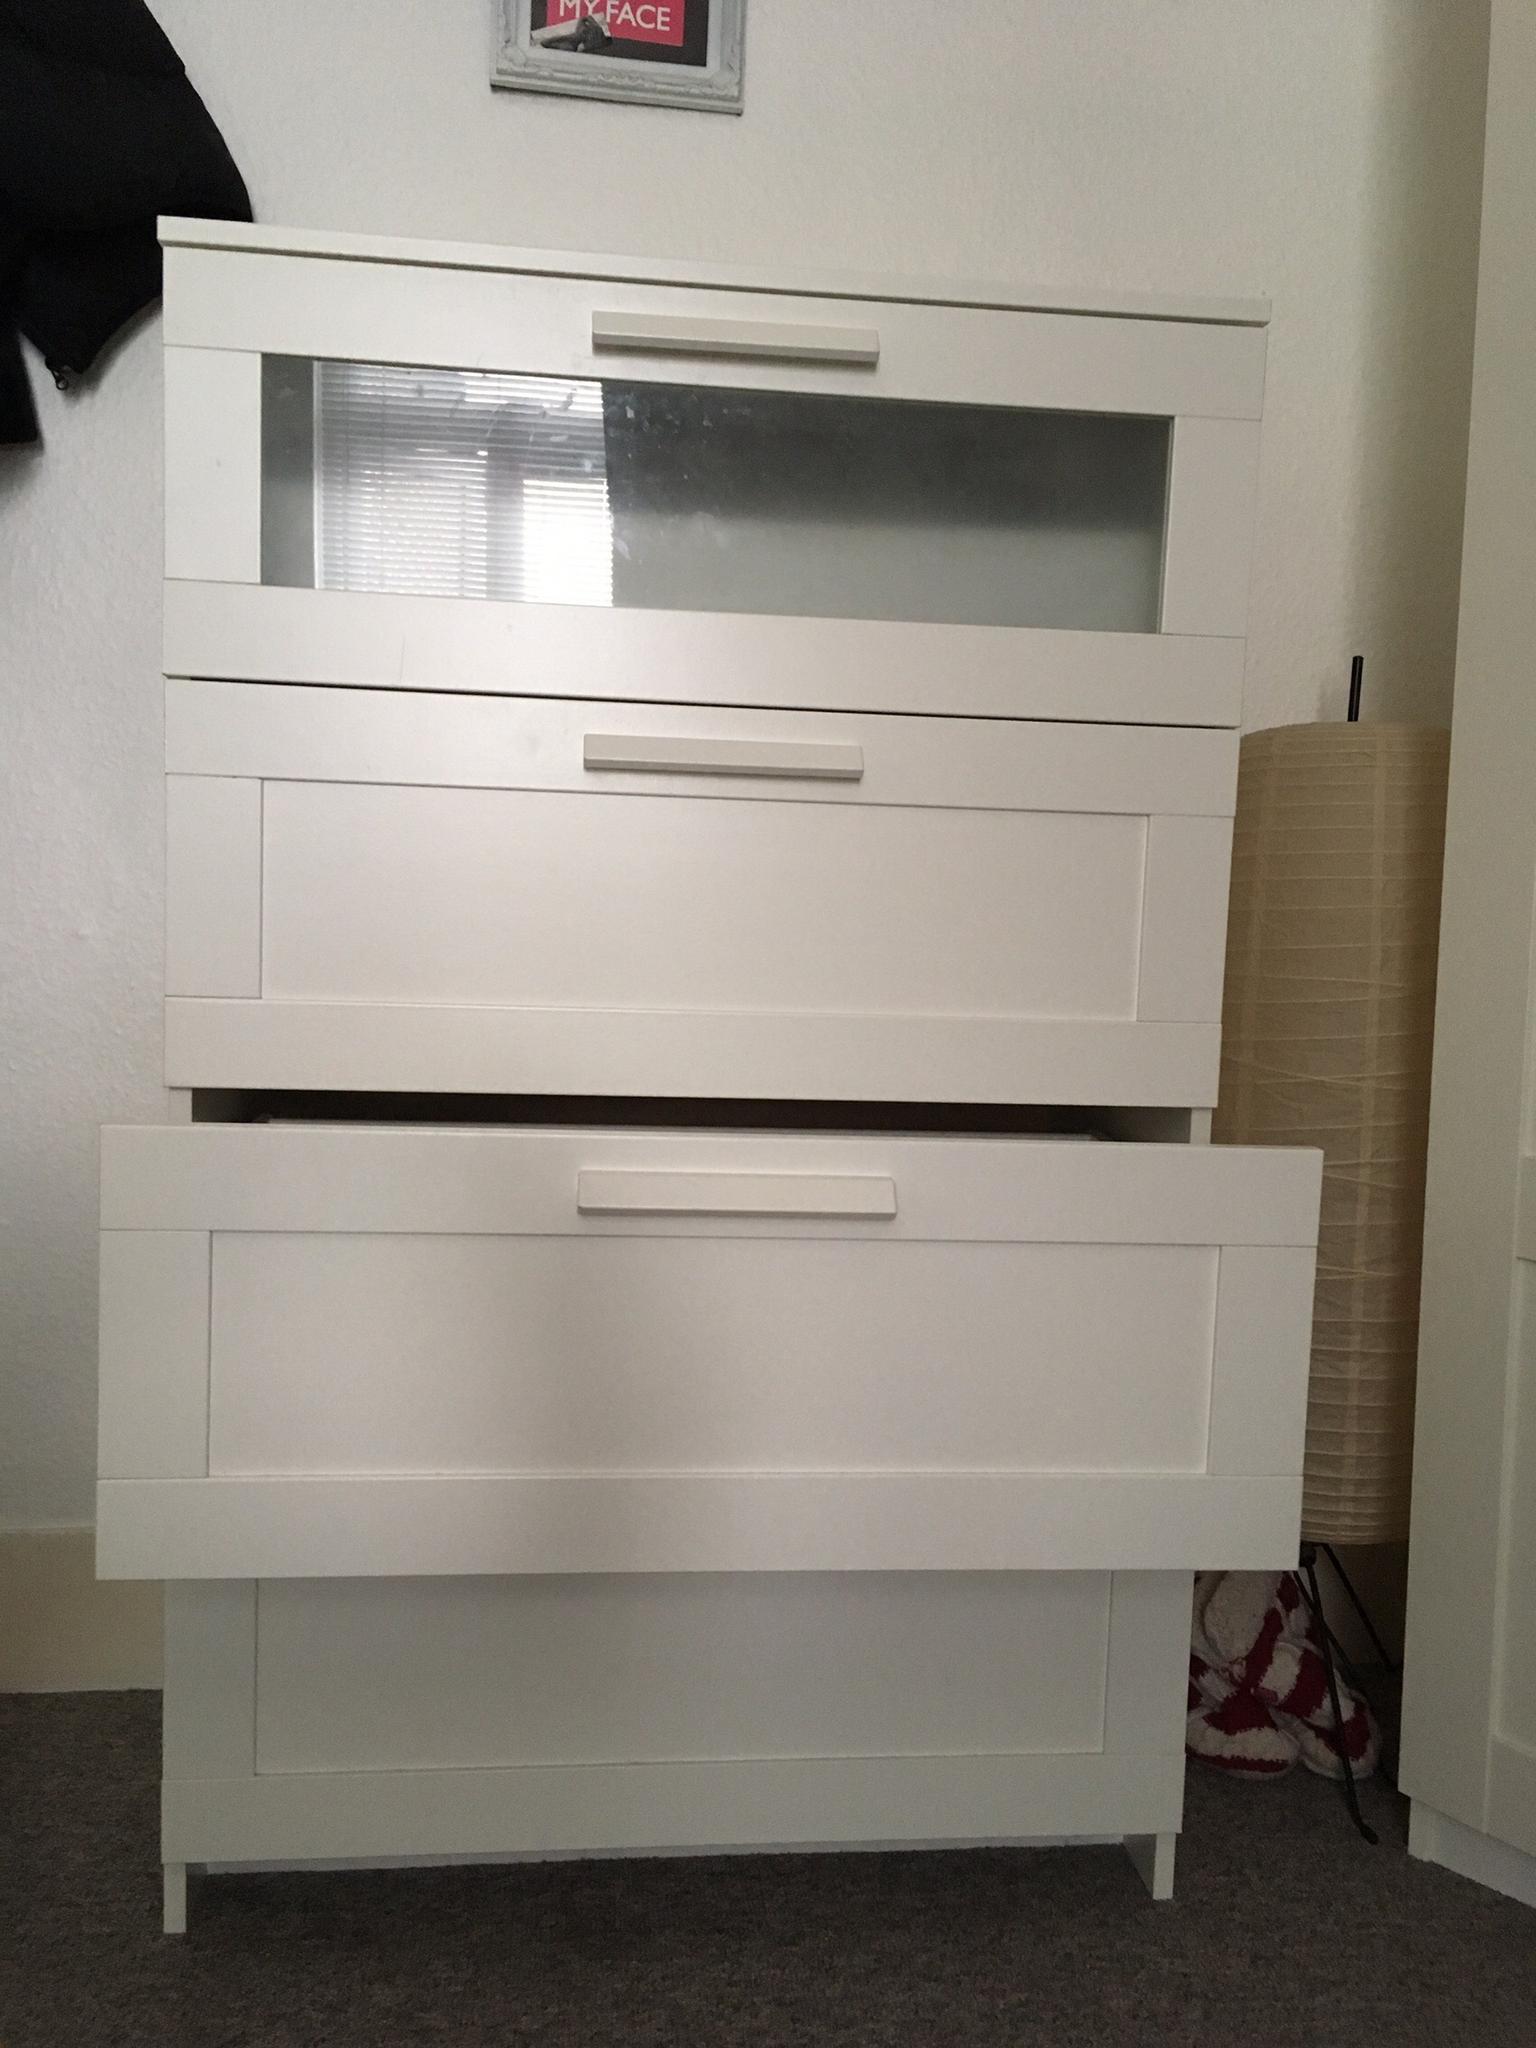 Ikea Brimnes Chest Of 4 Drawers White In Sw16 London Fur 45 00